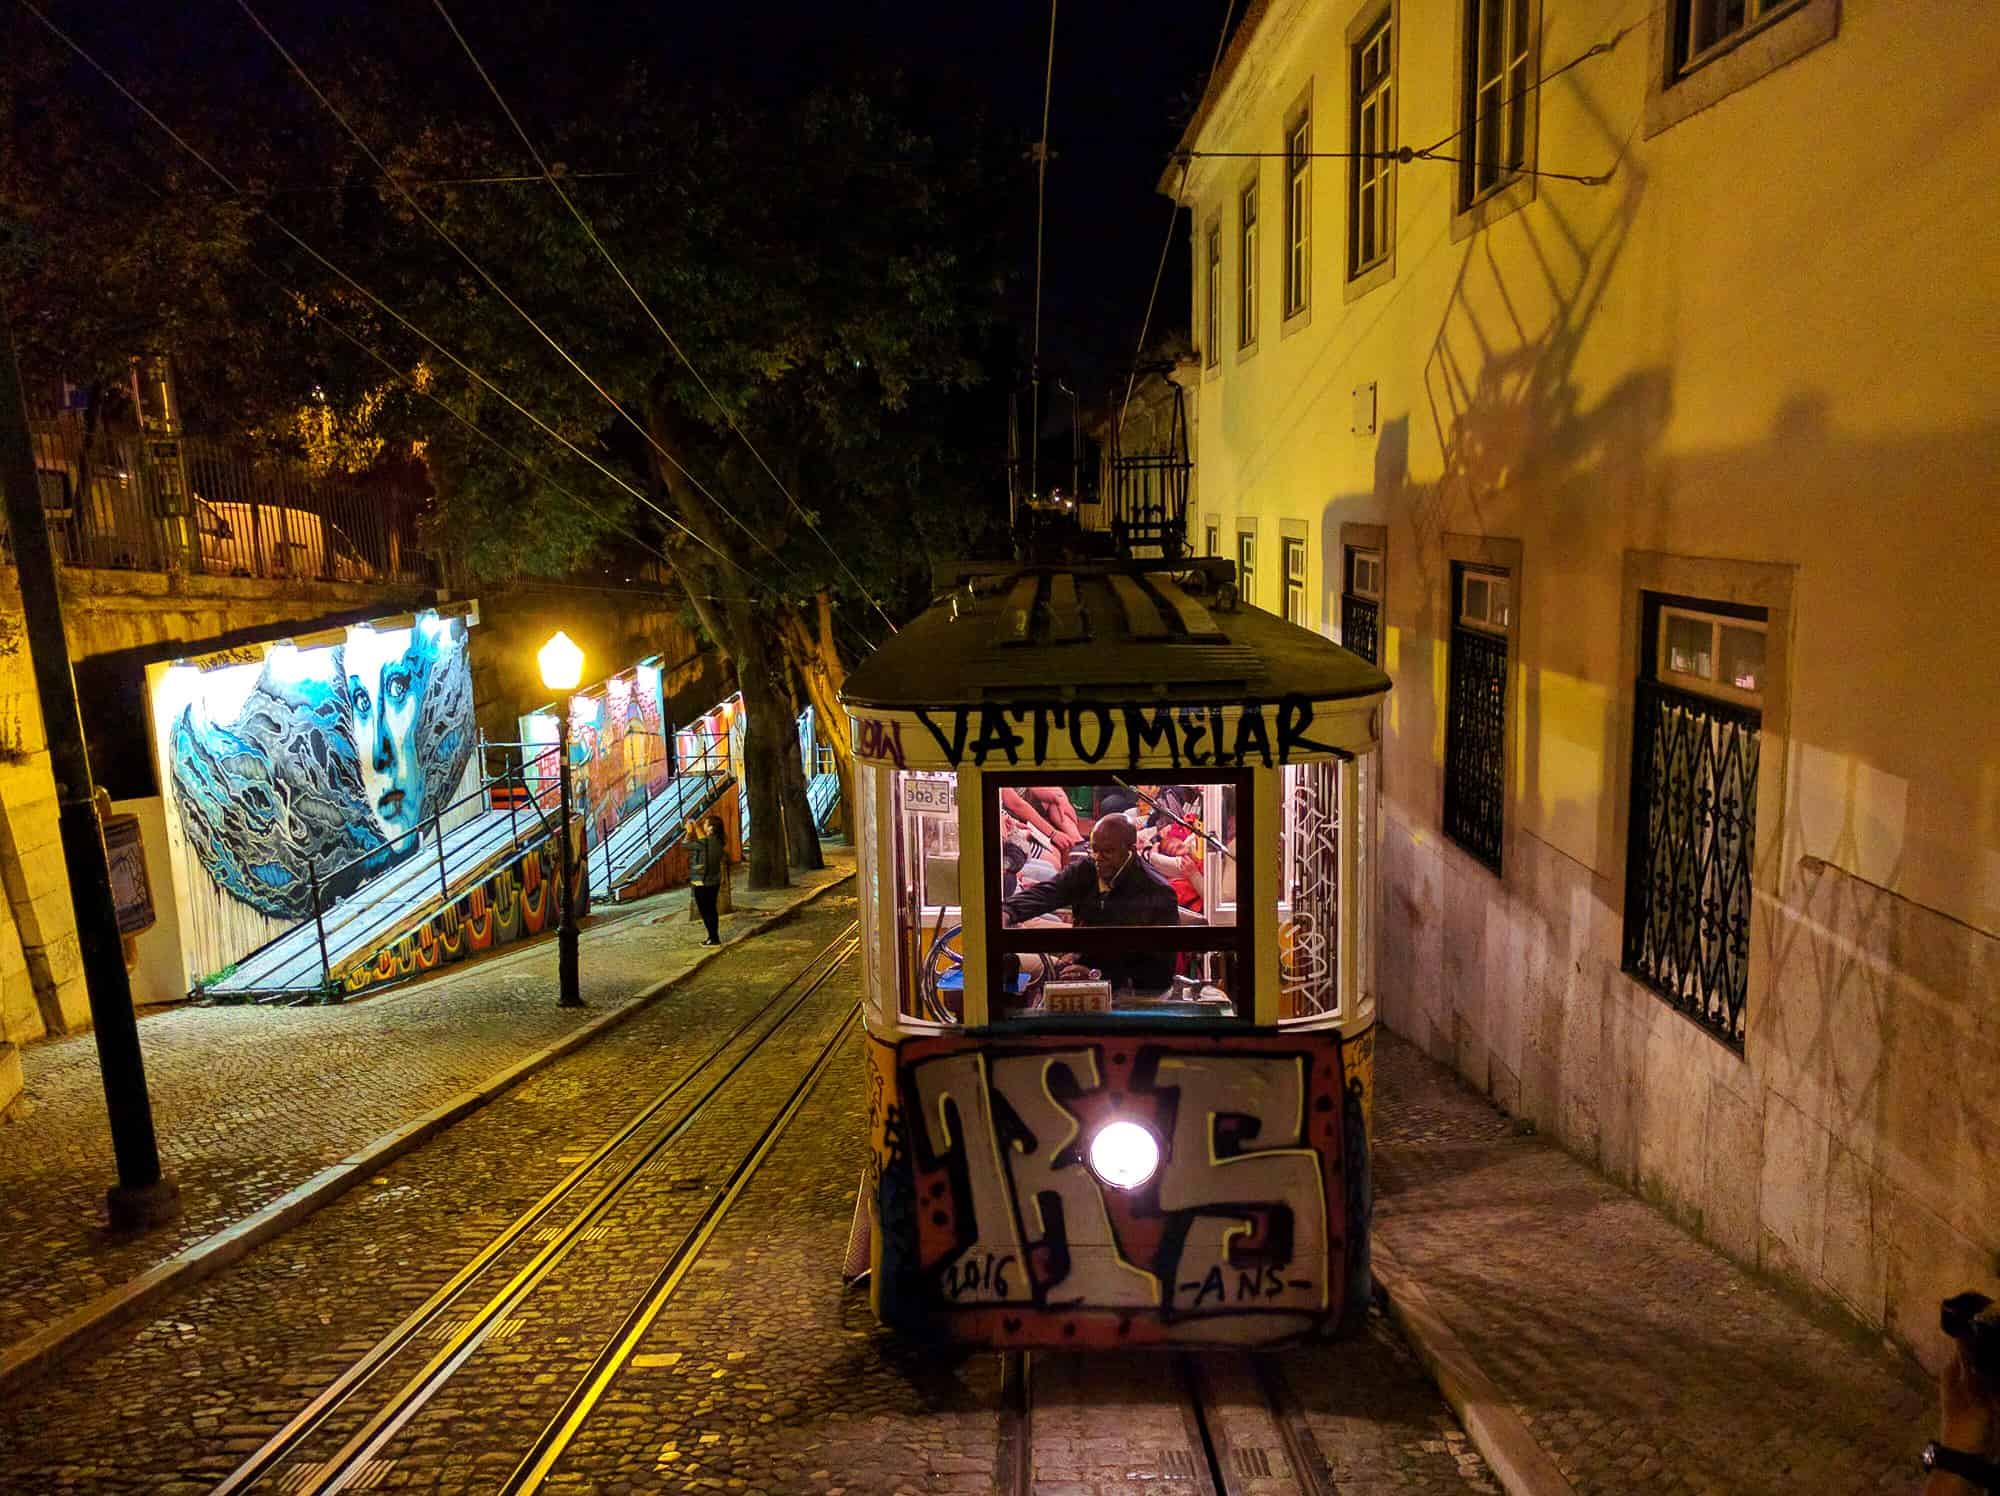 A tram in Lisbon at night, with graffiti on the front and lit up inside as it climbs up a steep cobbled street